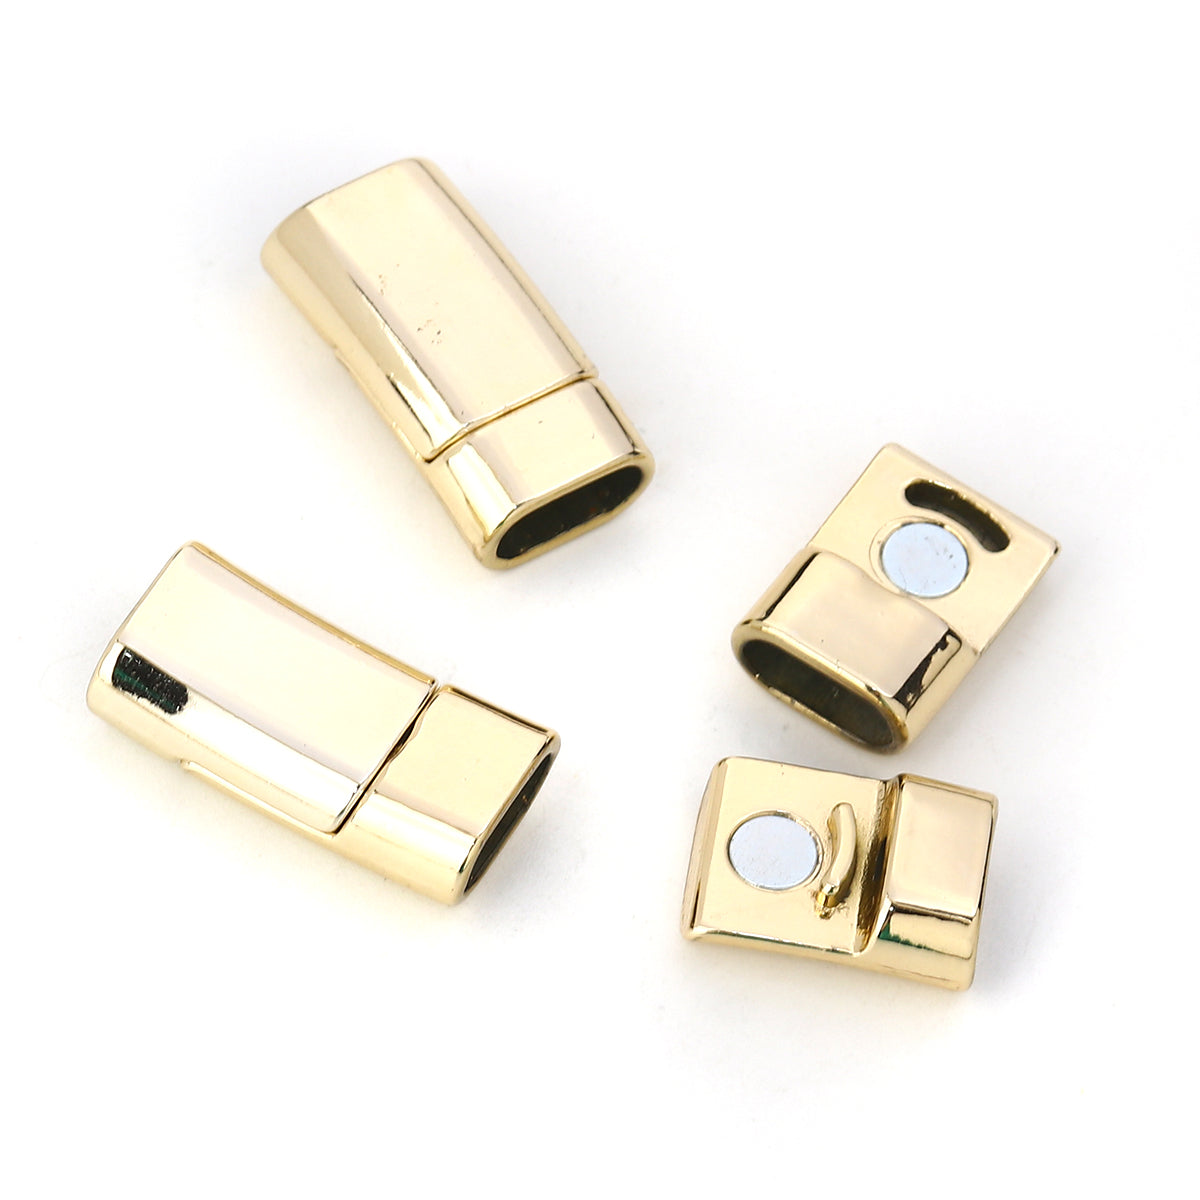 39-636 MAG-LOK 1/20, 14kt Gold-Filled Magnetic Jewelry Clasp, Superior  Quality, Button, 6mm - Rings & Things